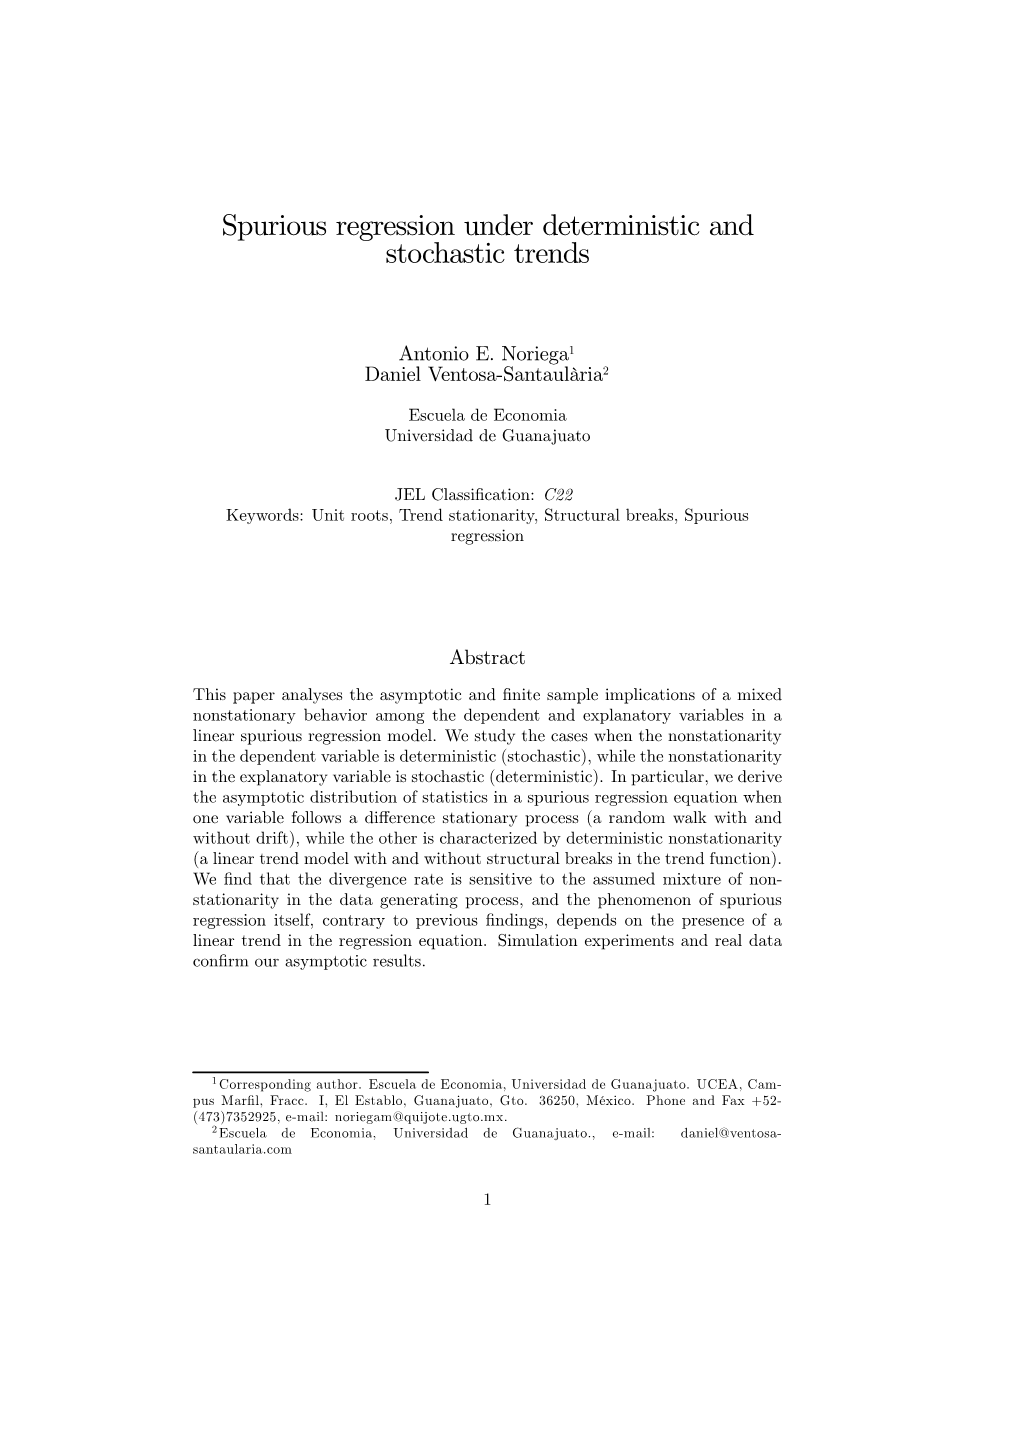 Spurious Regression Under Deterministic and Stochastic Trends